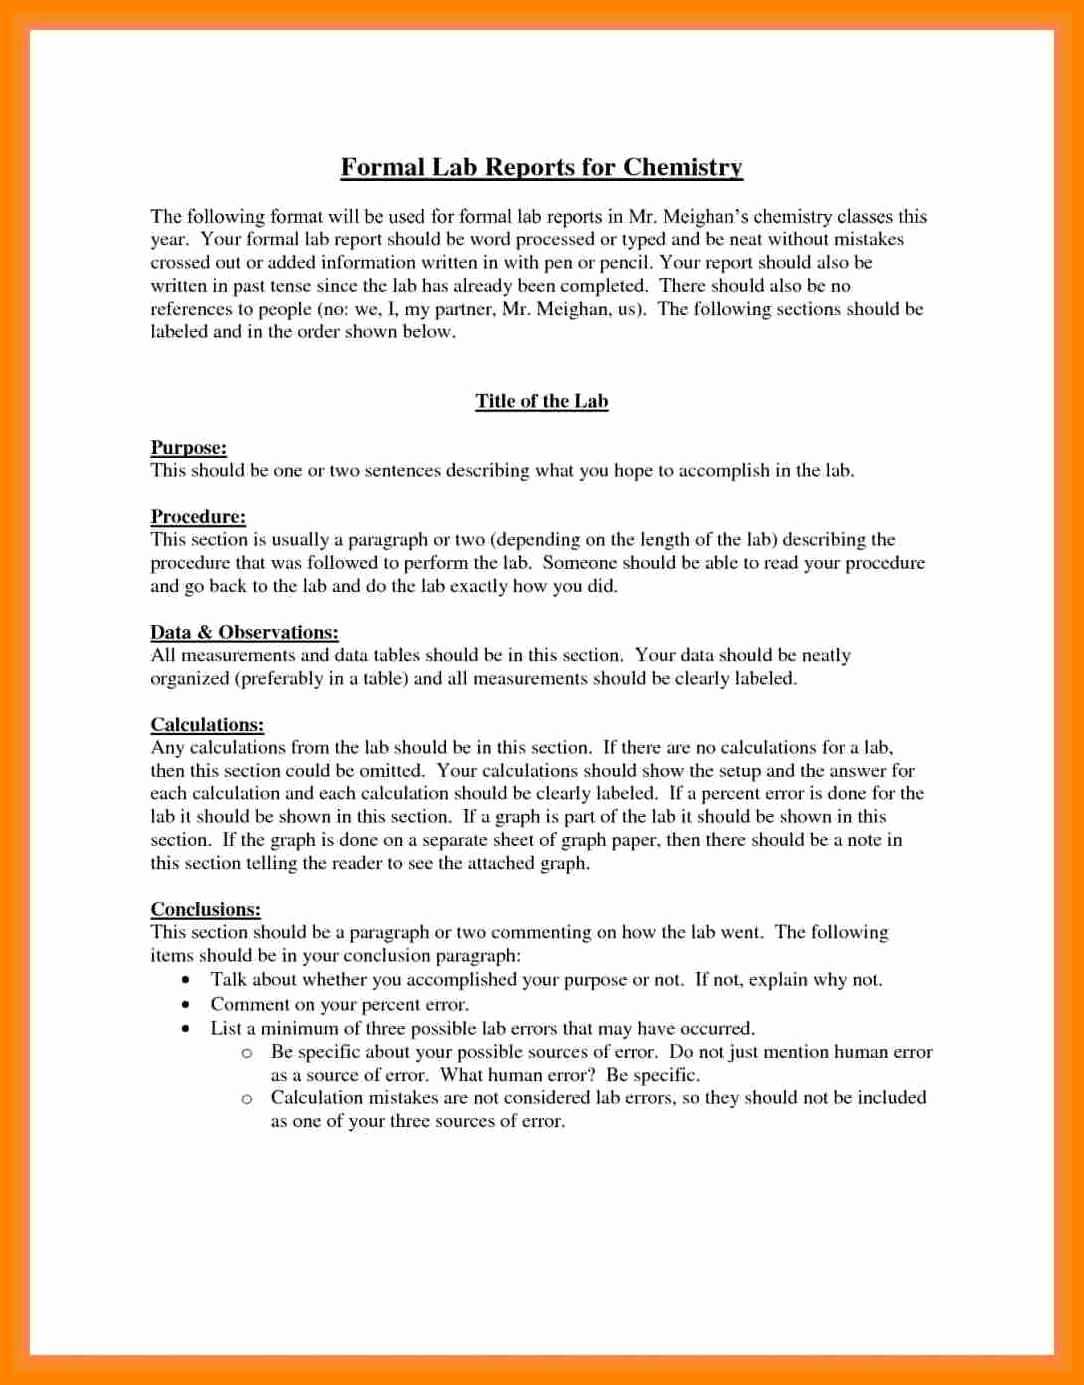 003 Formal Lab Report Example Best Write Up Template Of For Lab Report Template Chemistry